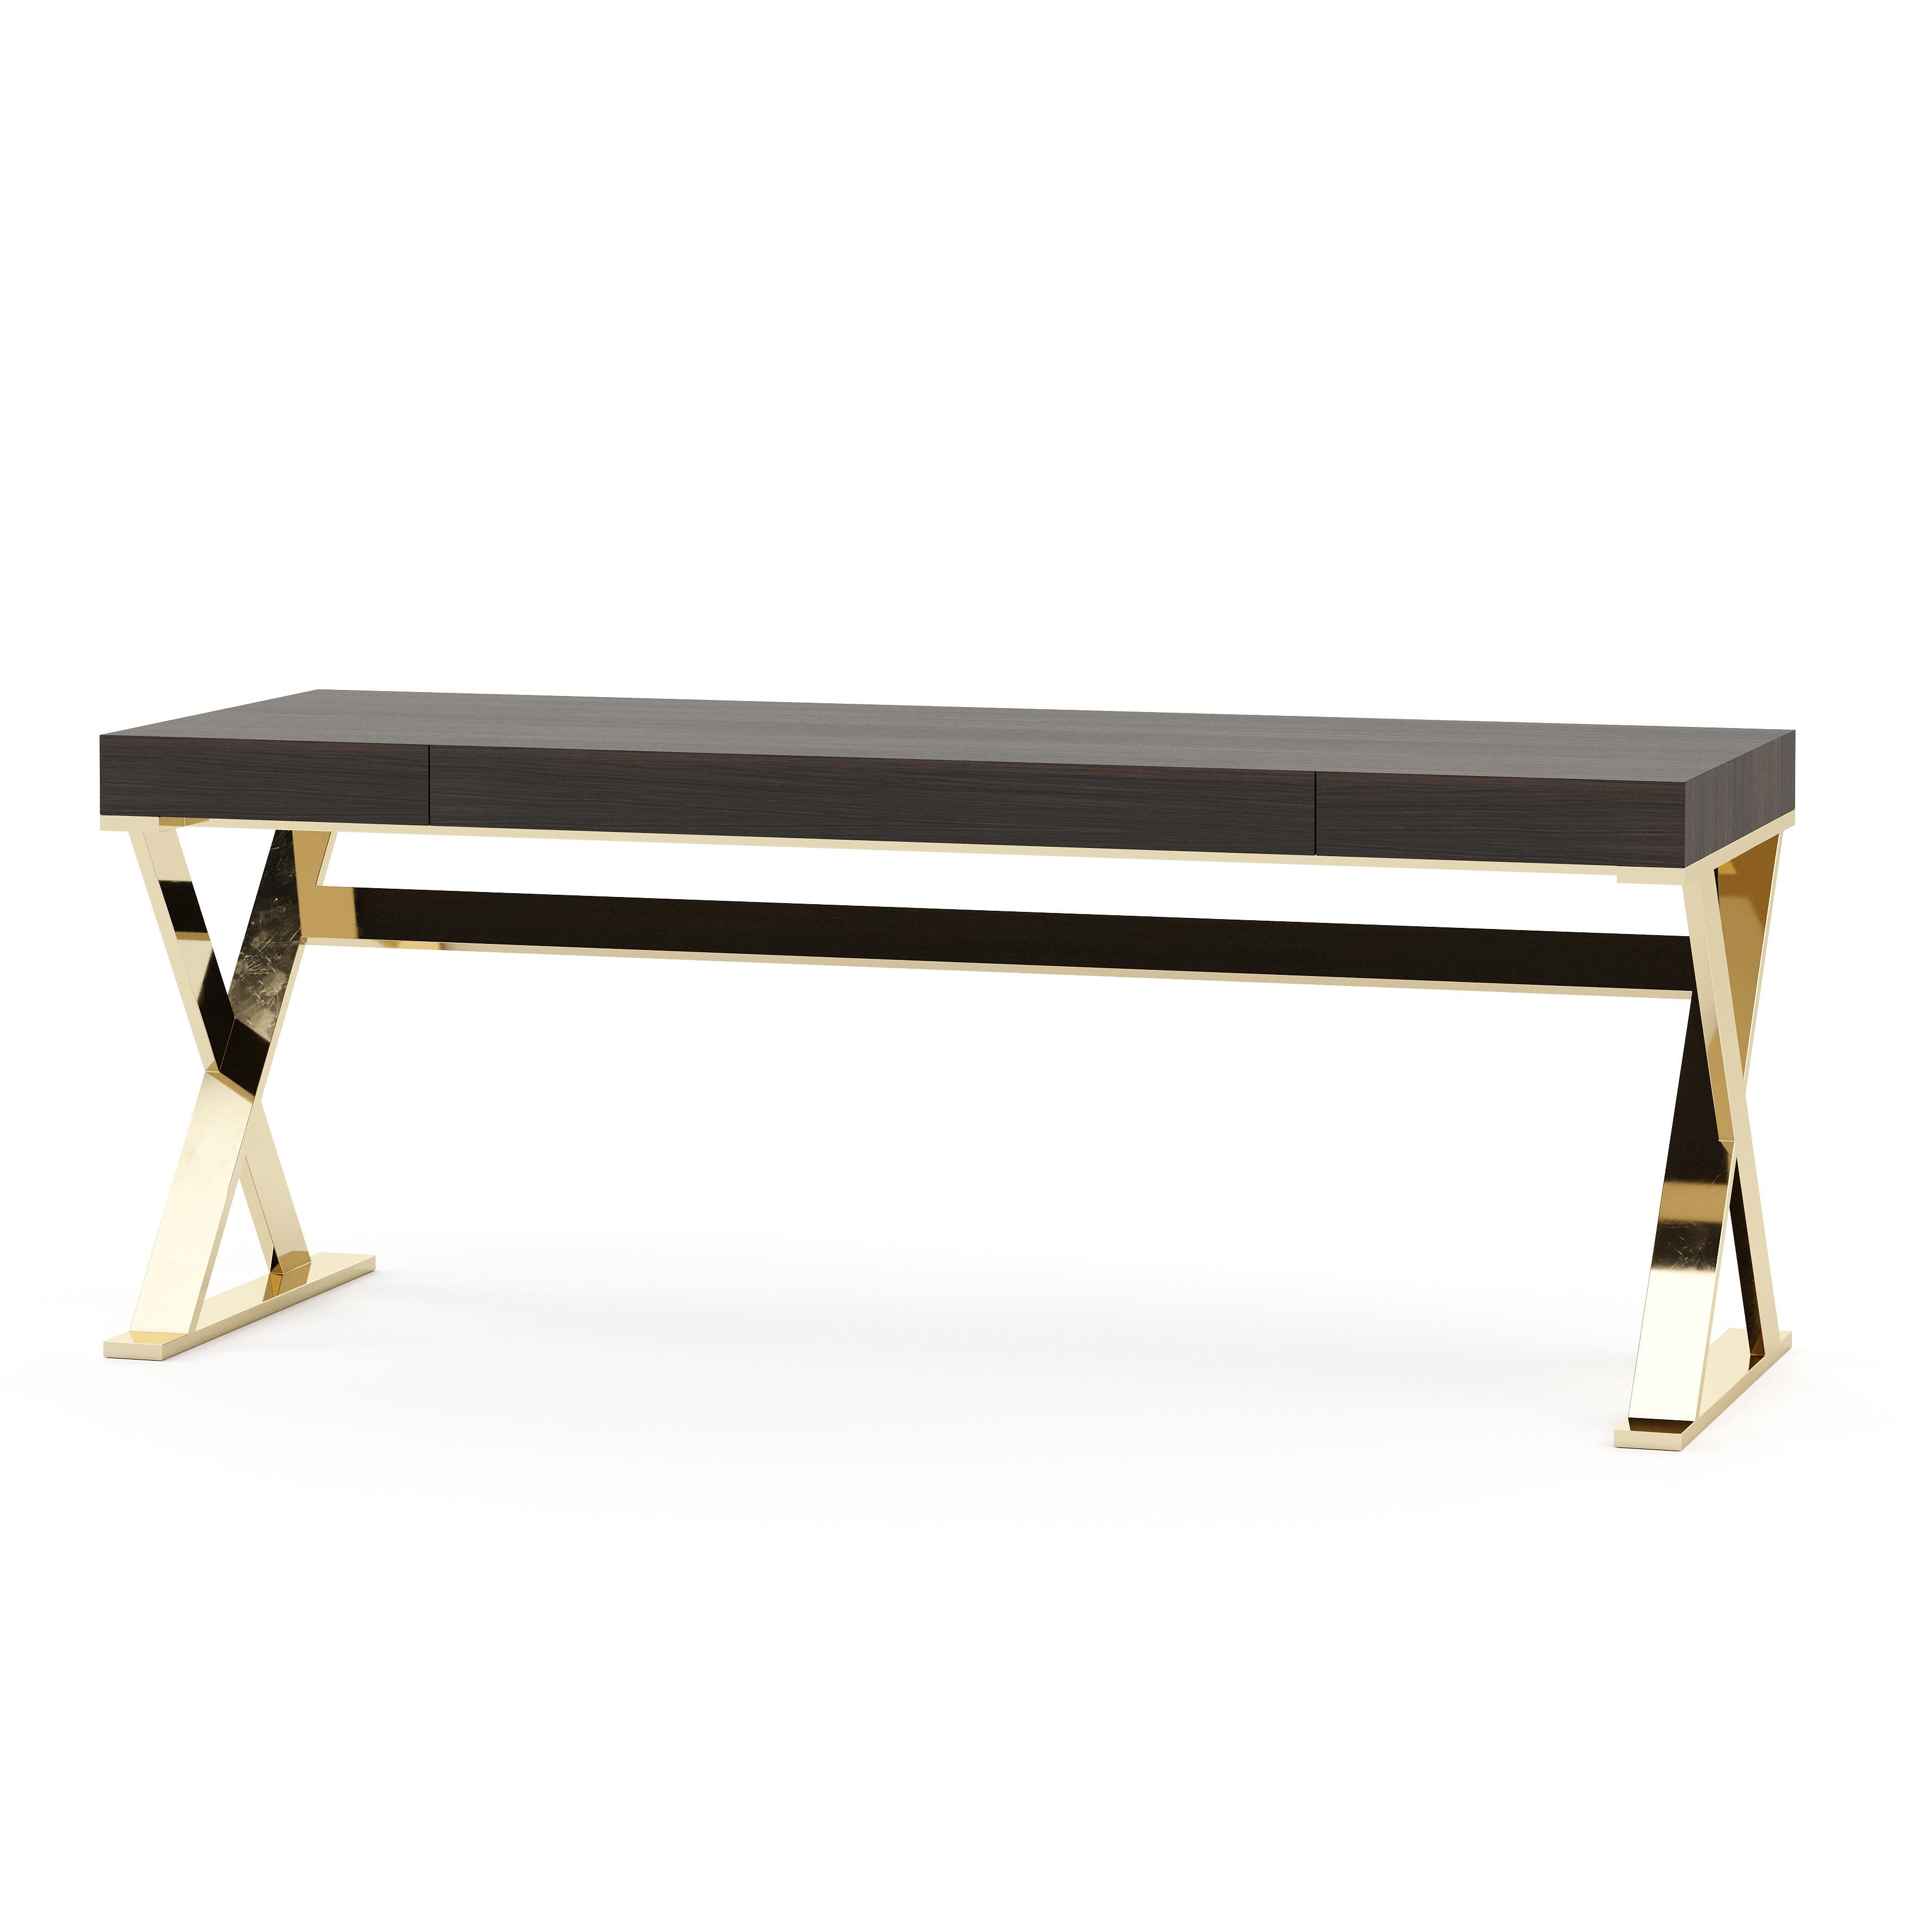 Ivy desk is the perfect piece for your exclusive home office. Crafted from dark wood, this writing desk with crossed metallic feet will boost your creativity.

* Available in different finishes.
** Also available with 62.99